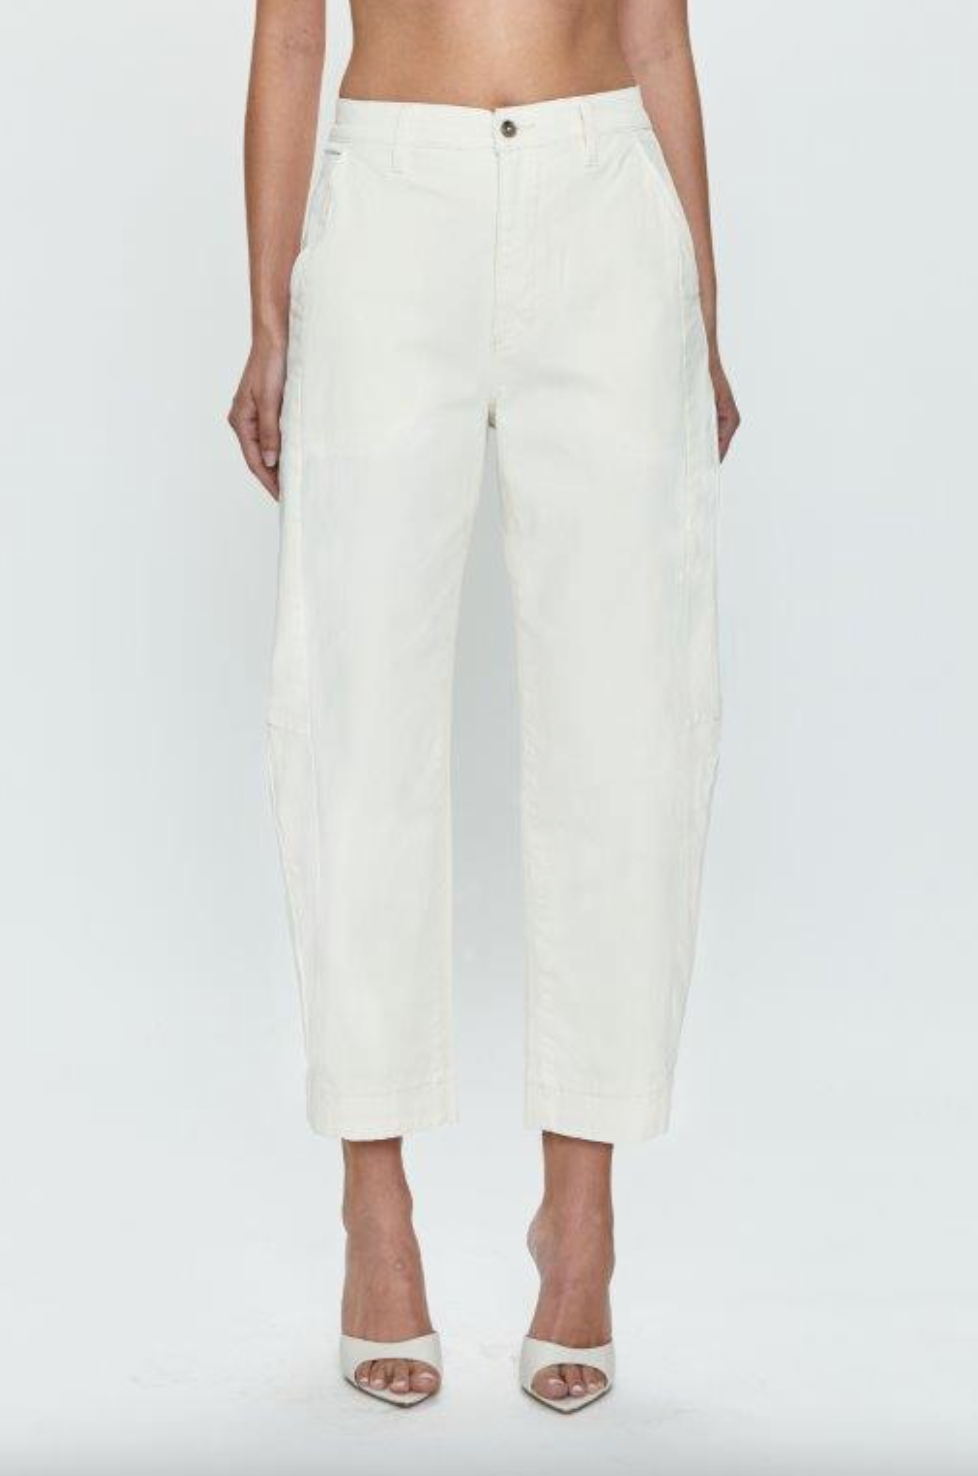 A woman wearing Pistola's Eli High Rise Arched Trouser, white, cropped, wide-leg pants and white sandals, shown from the waist down against a plain background.